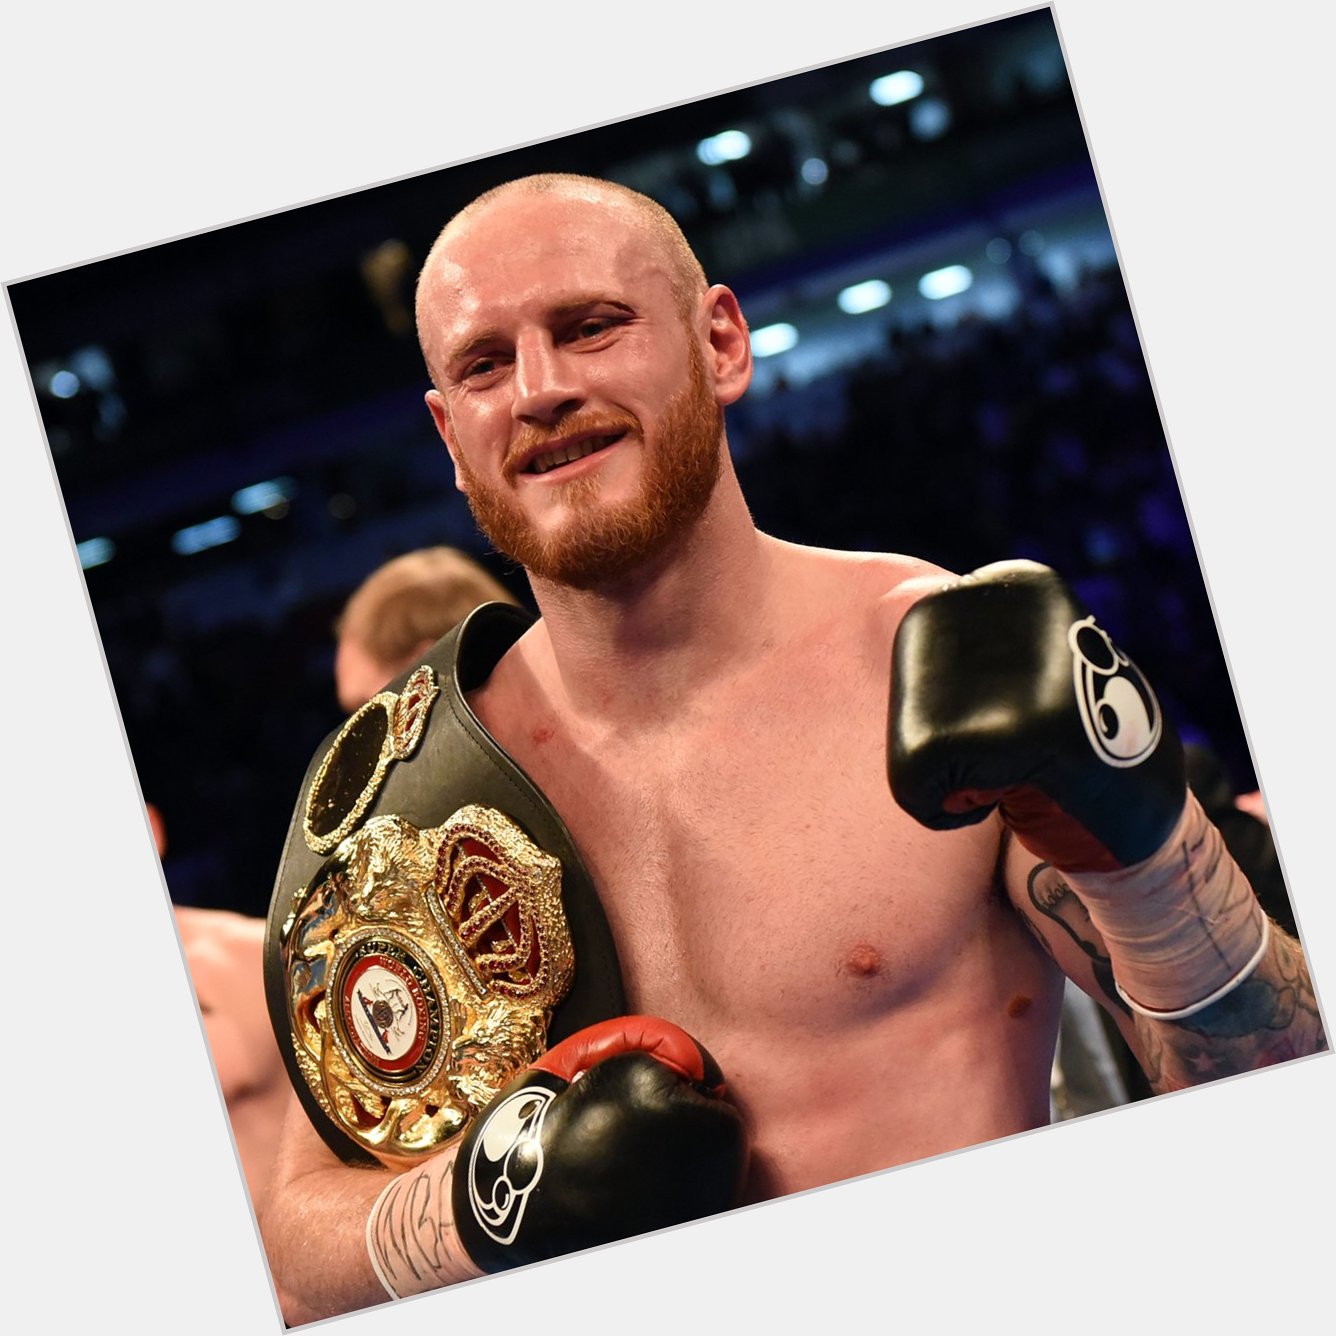 Https://fanpagepress.net/m/G/George Groves Dating 2